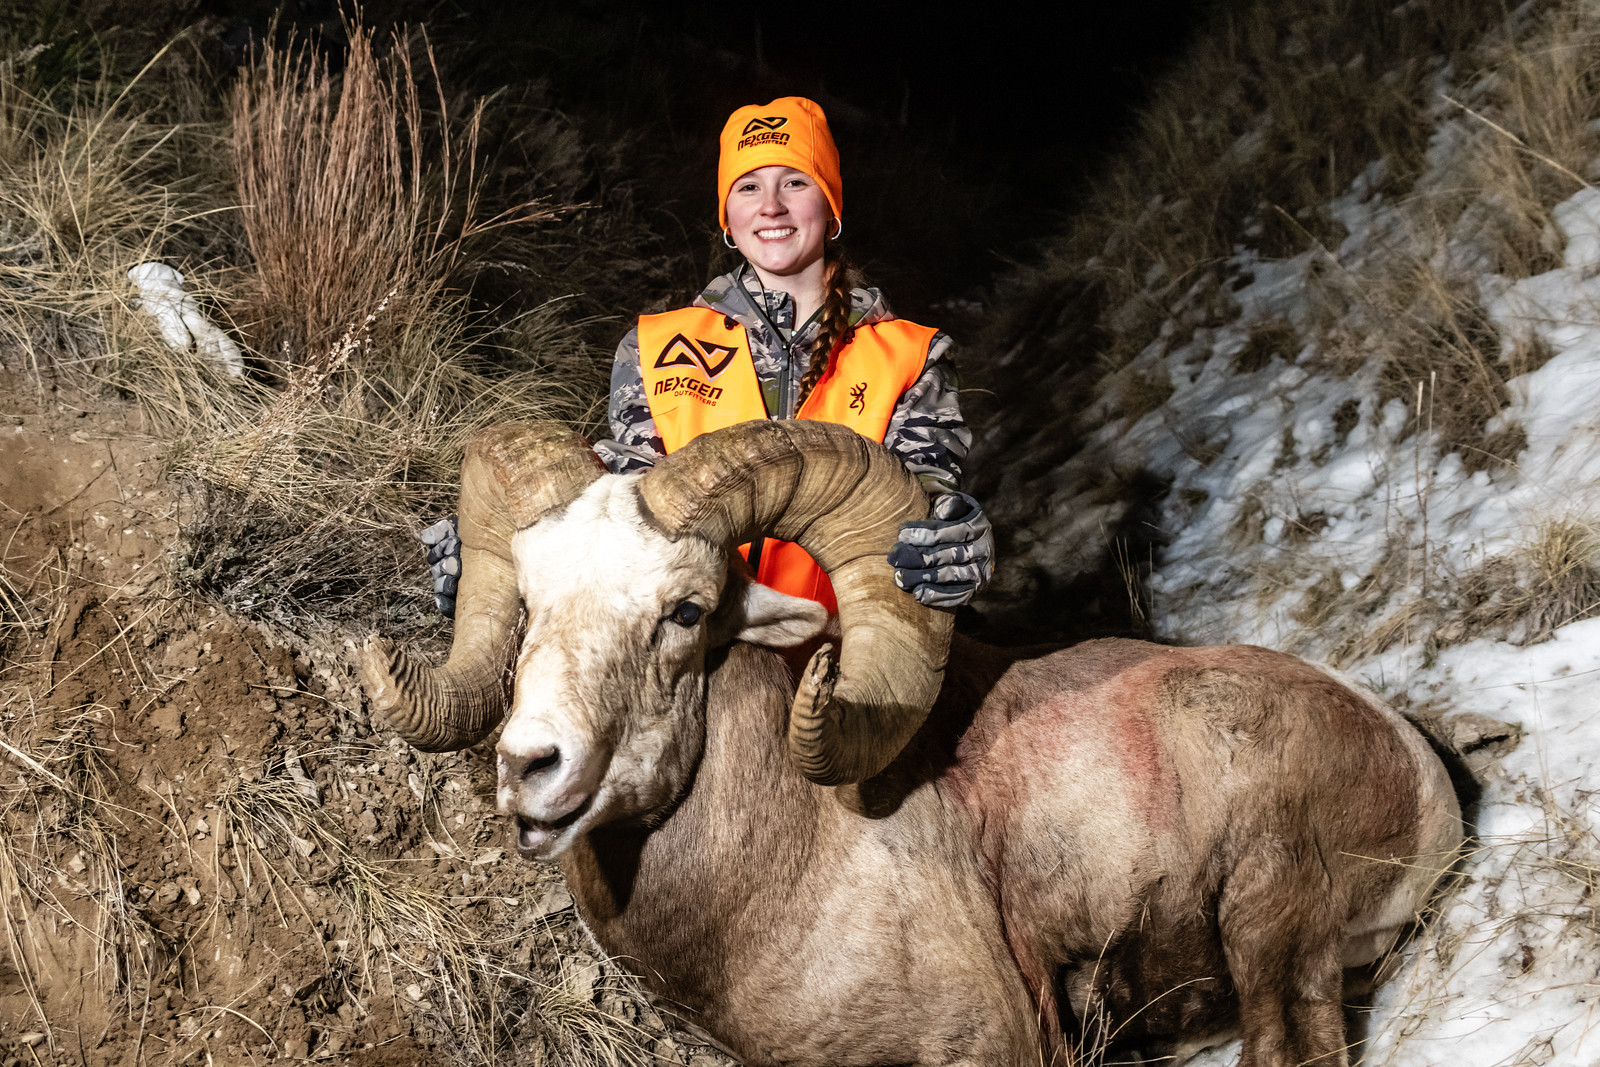 Kiersten Black, 15, poses with the bighorn sheep ram after her successful hunt. (Photo by Justin Haag, Nebraskaland Magazine and Nebraska Game and Parks Commission.)